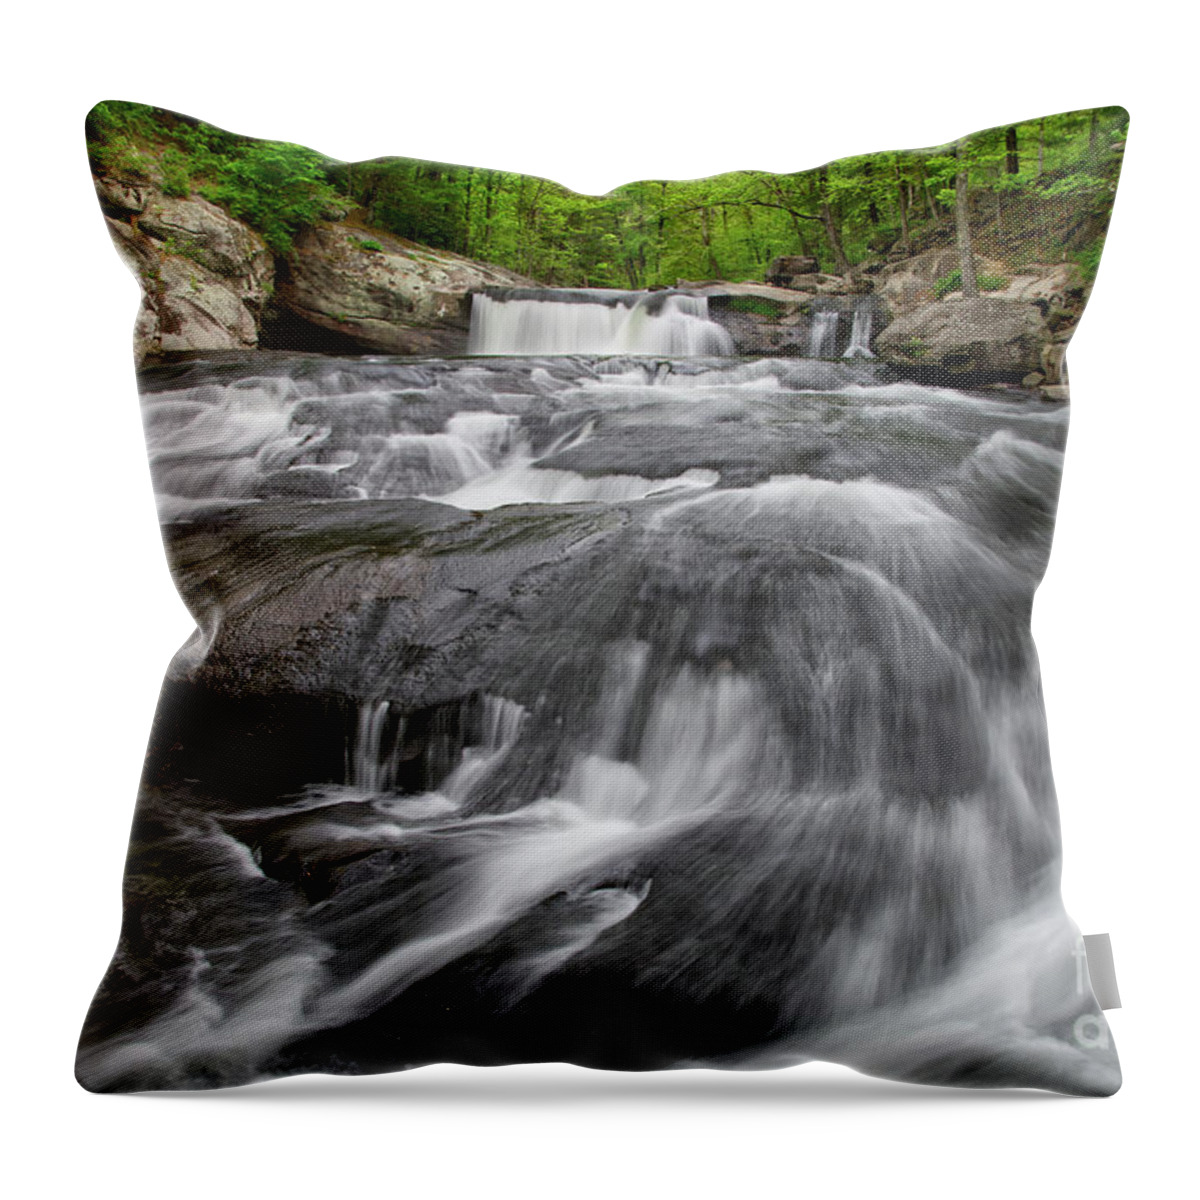 Baby Falls Throw Pillow featuring the photograph Baby Falls 19 by Phil Perkins